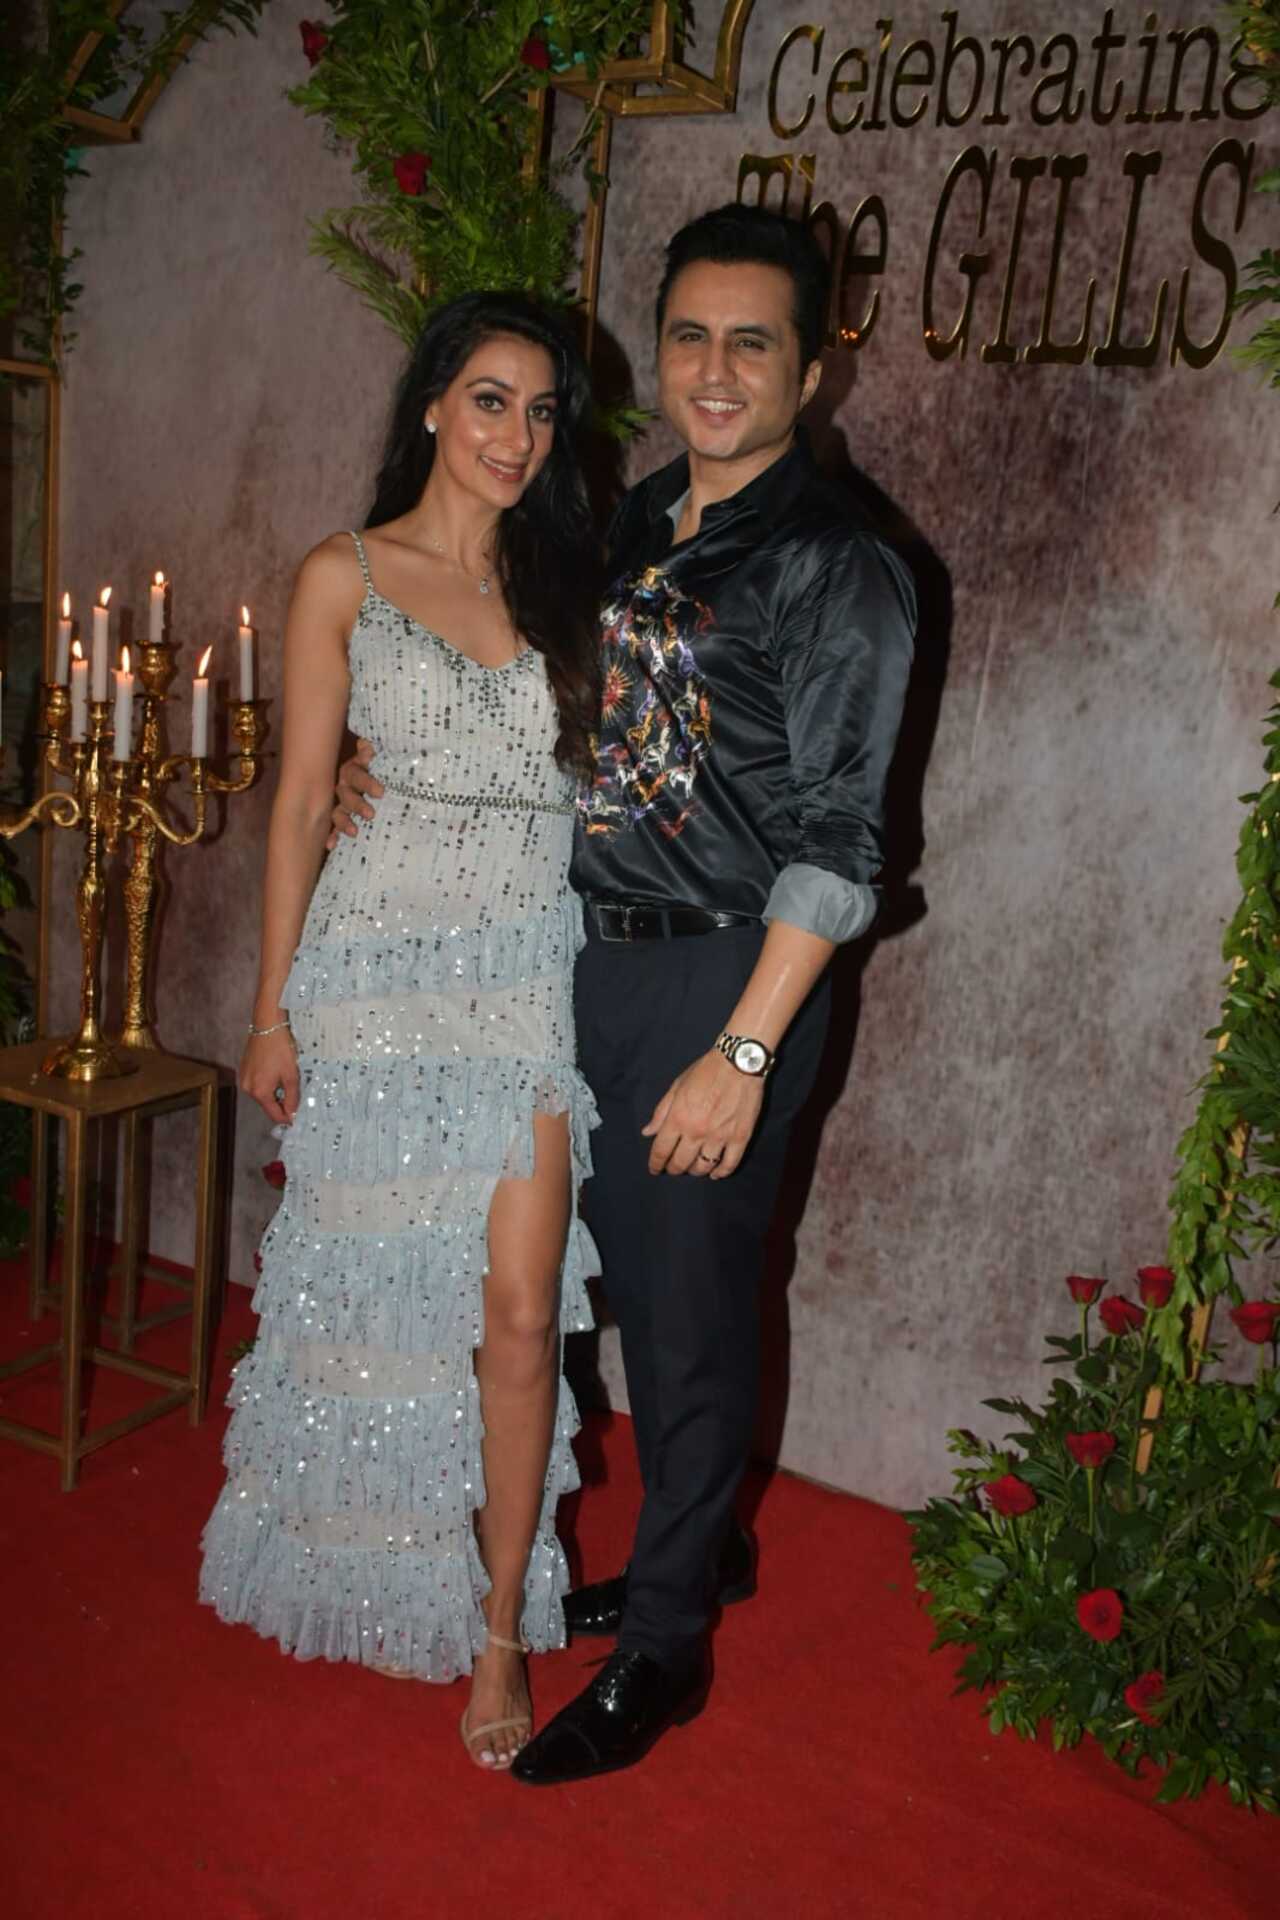 Aman Gill and Amrita greeted the media during their wedding party. He looked dapper in a printed shirt. She looked stunning in a gown